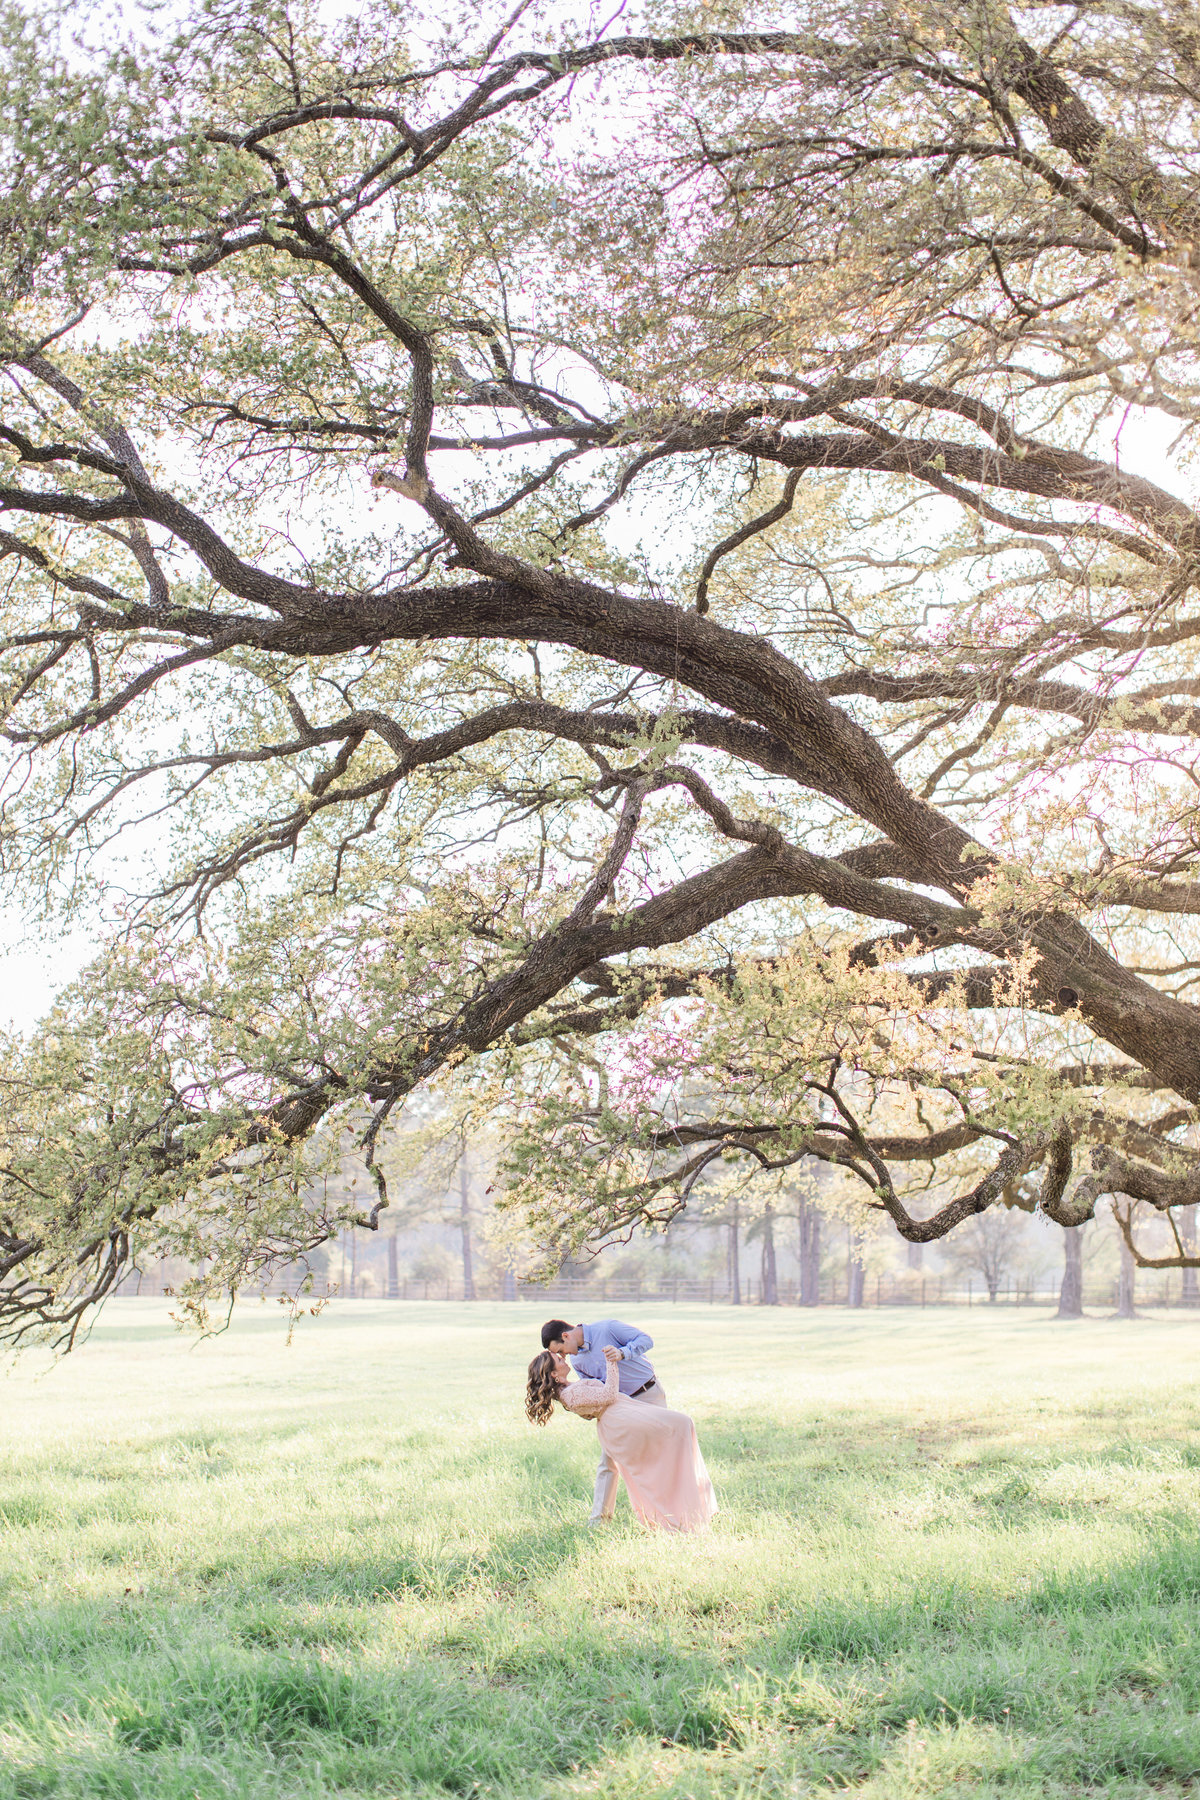 An Engaged Couple Under an Oak Tree